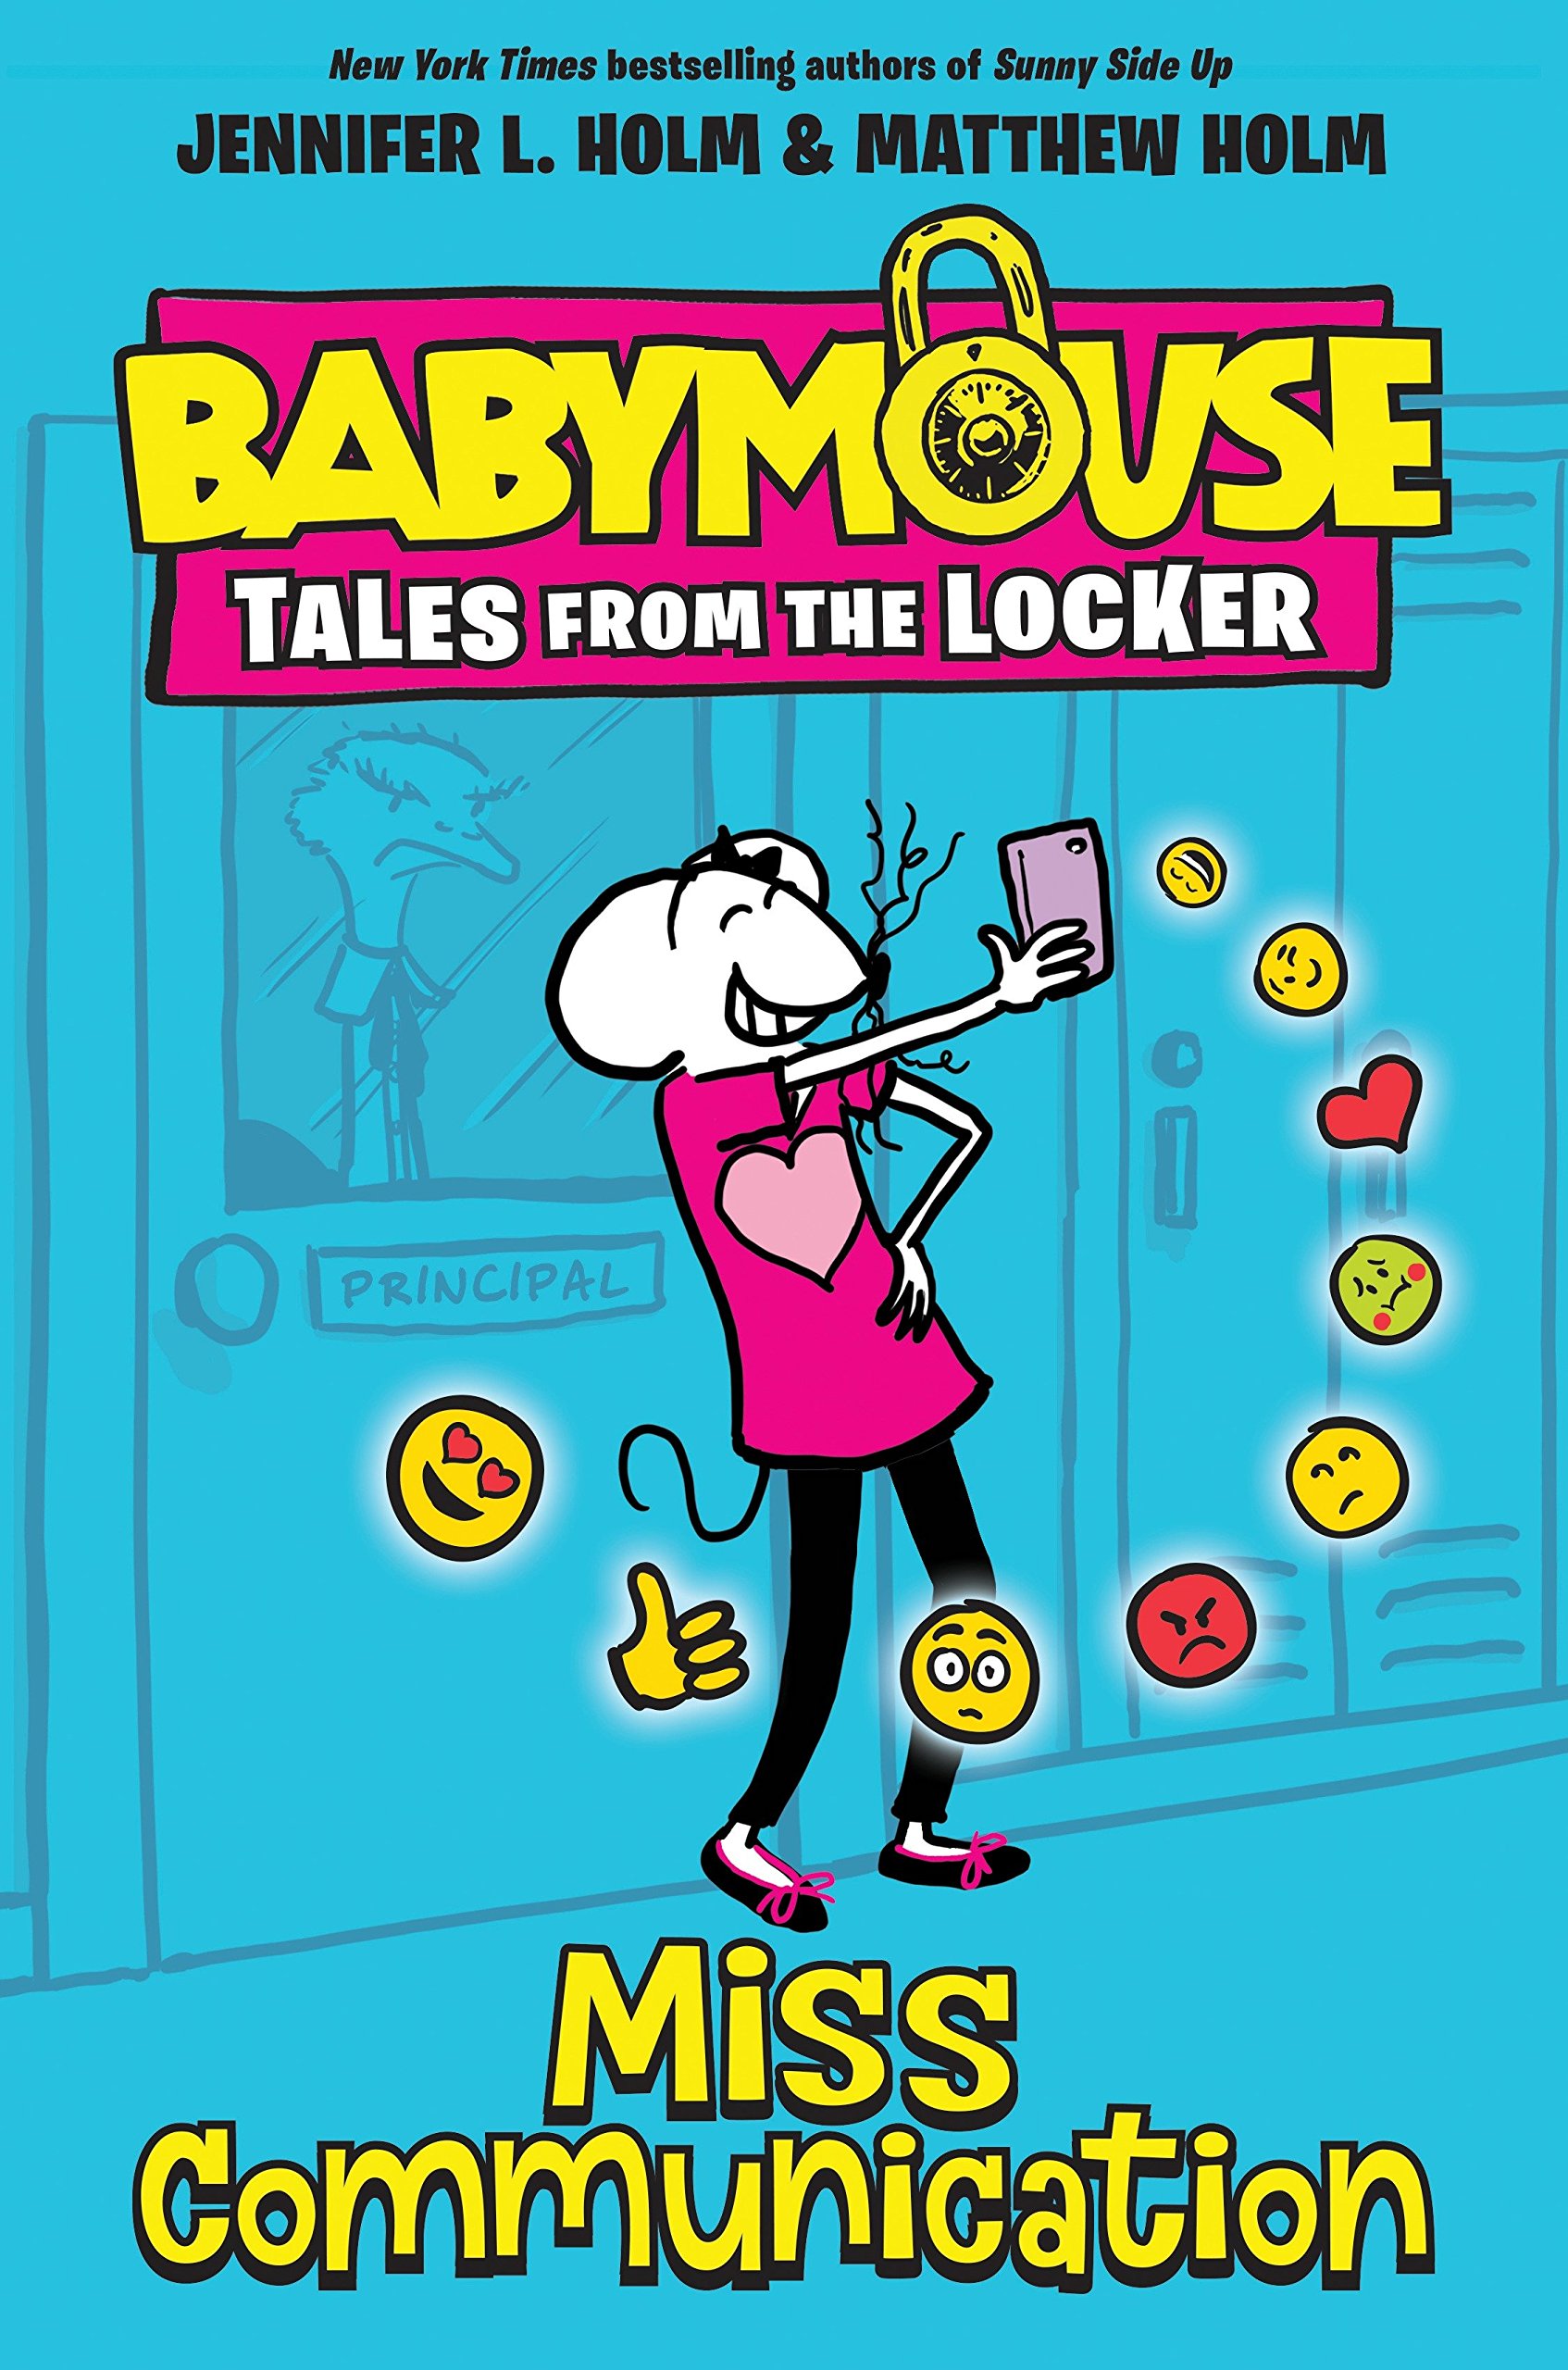 Babymouse Tales from the Locker #2: Miss Communication